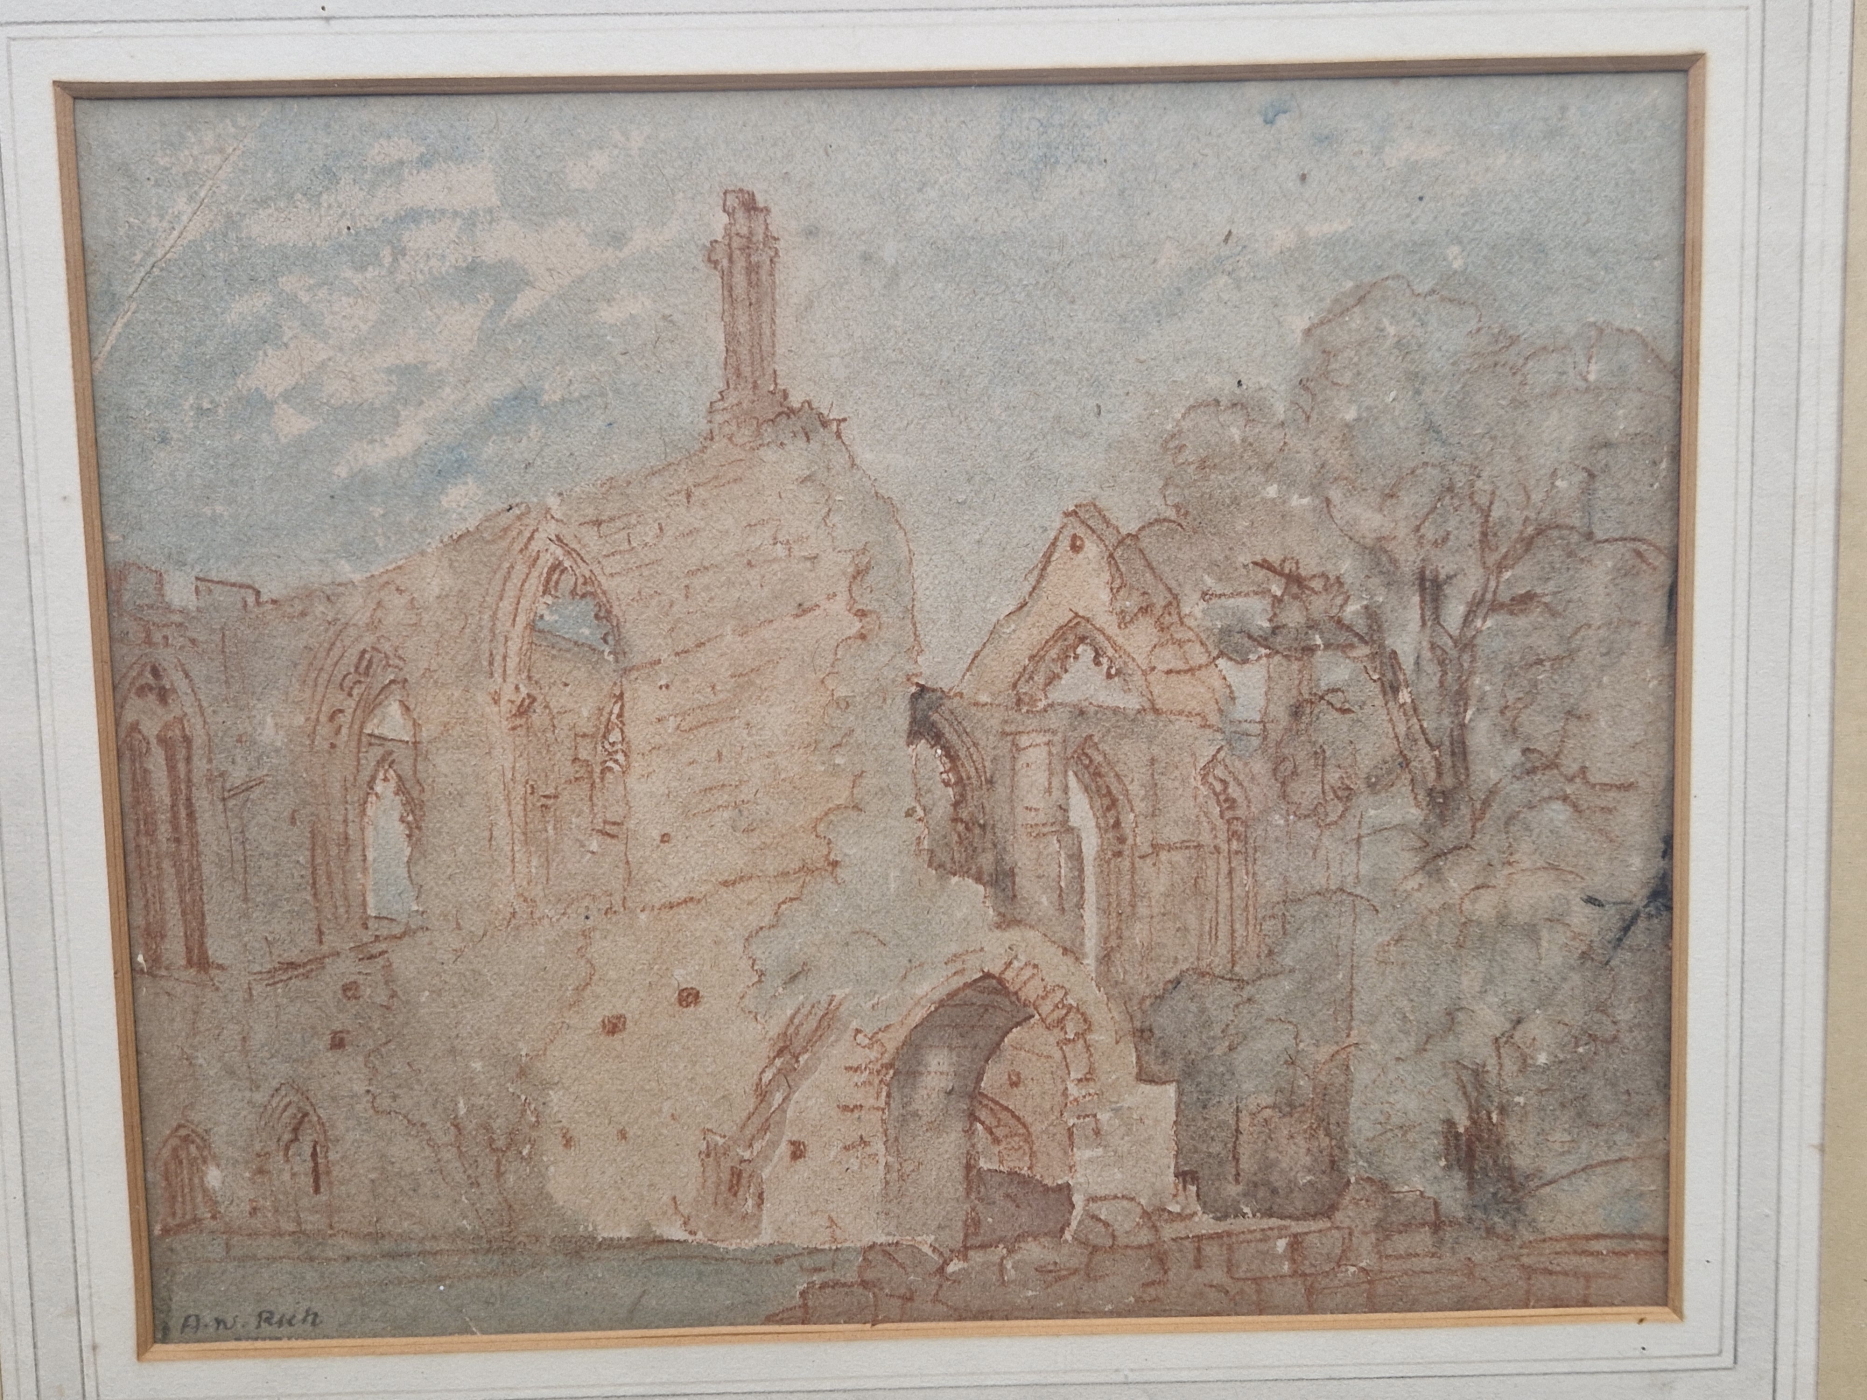 A.N. RICH, ABBEY RUINS, SIGNED, RED CHALK AND WASH, 28 X 23cms.